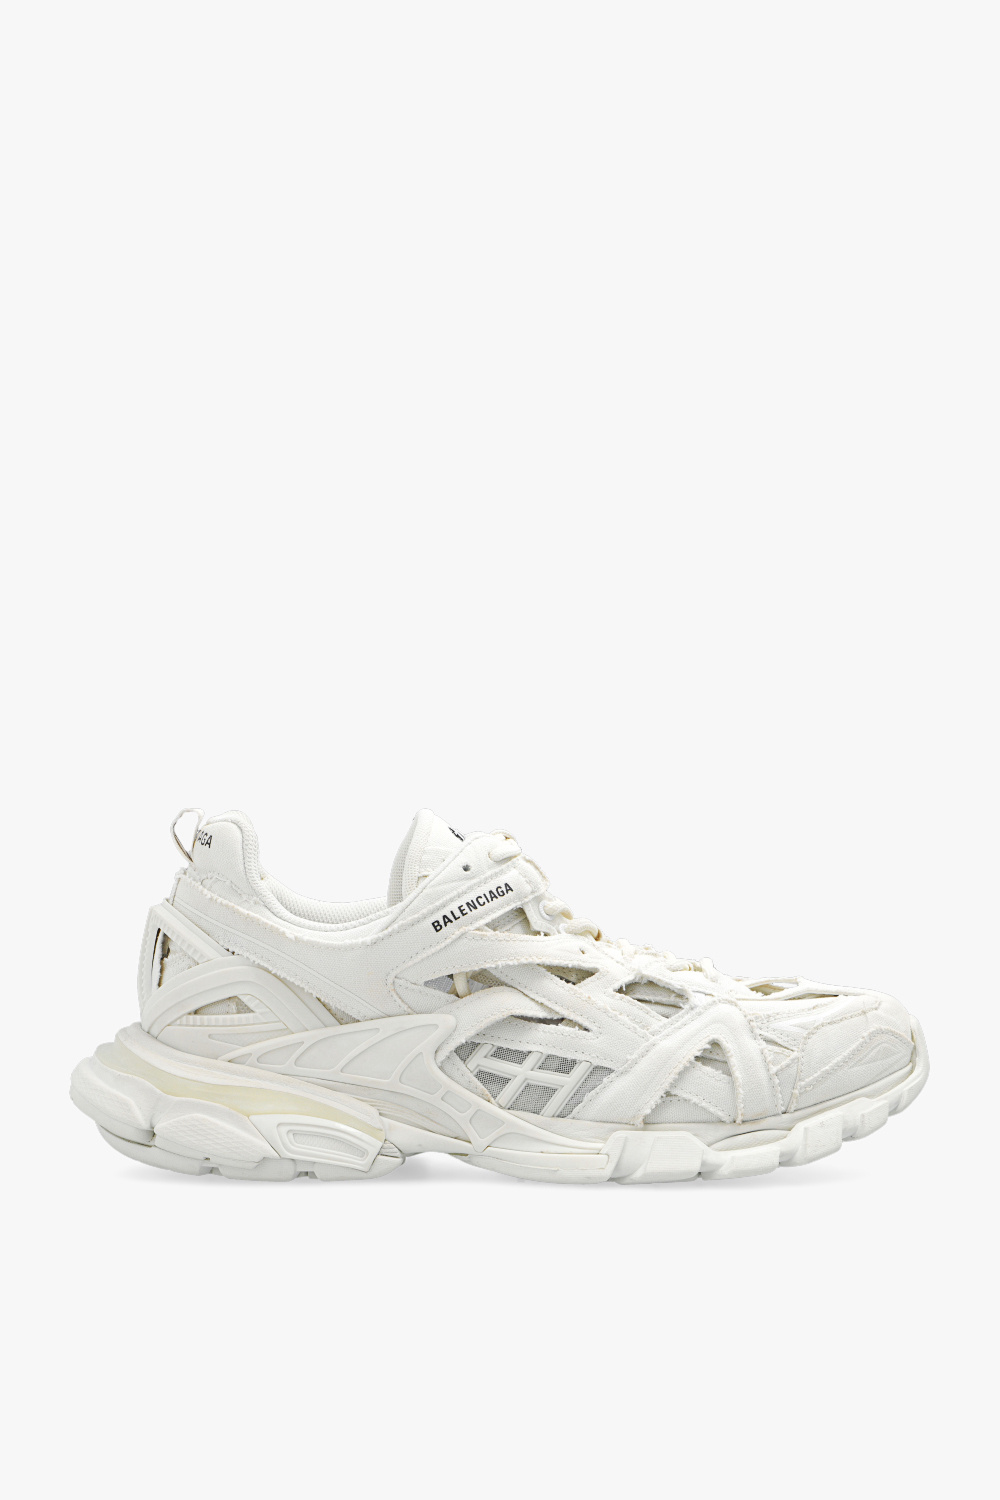 Balenciaga Speed Runners  Clothing Connect 22